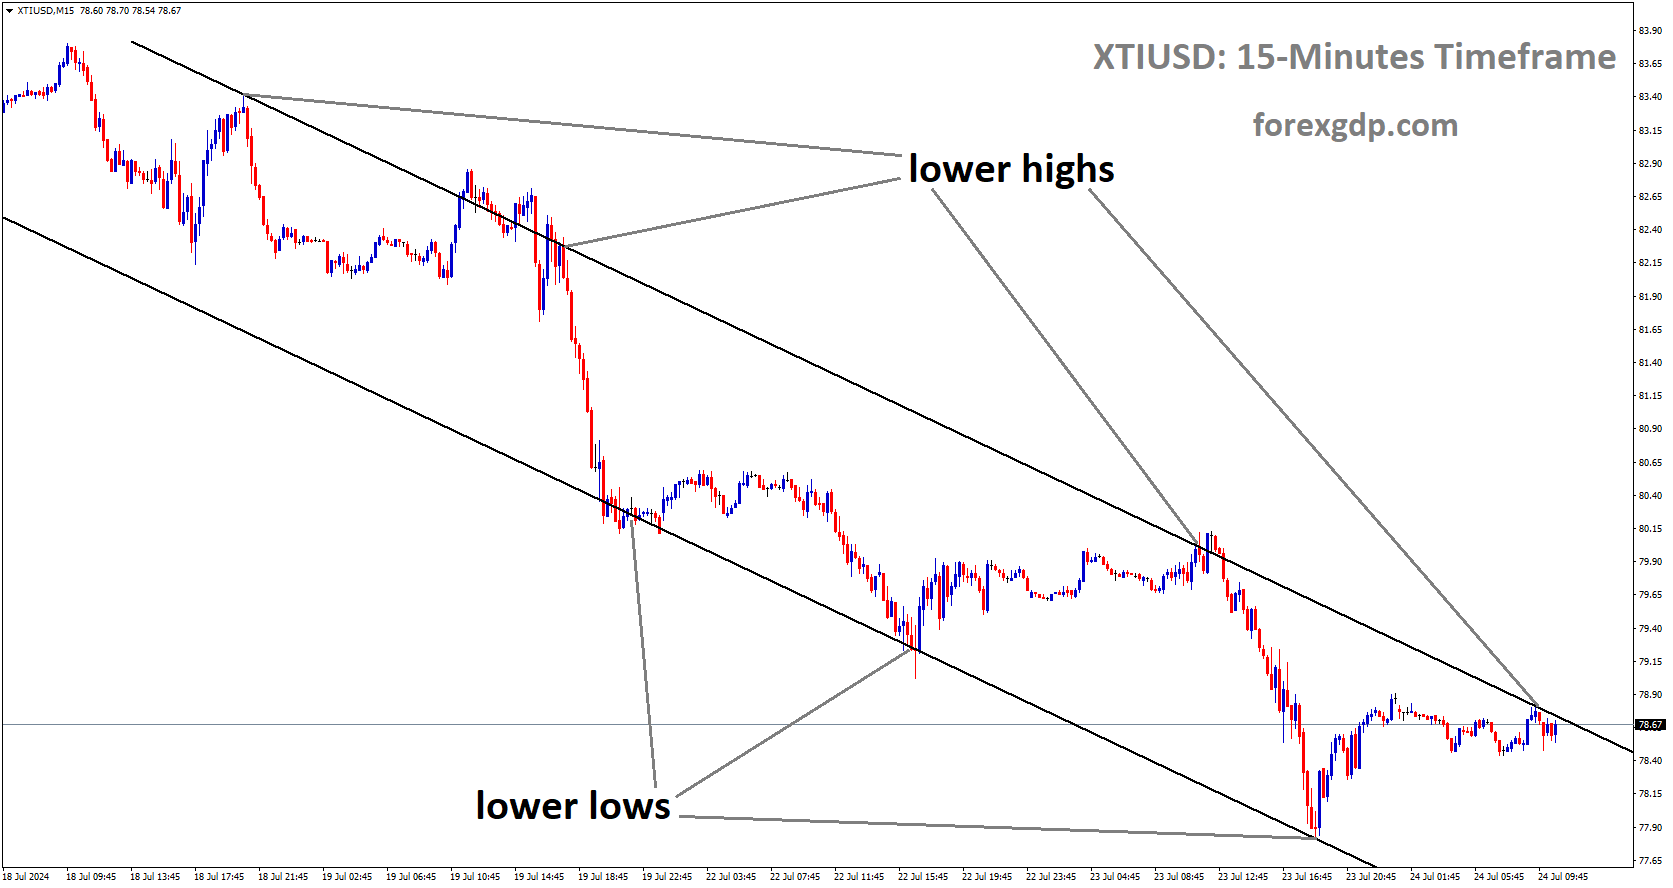 XTIUSD is moving in Descending channel and market has reached lower high area of the channel